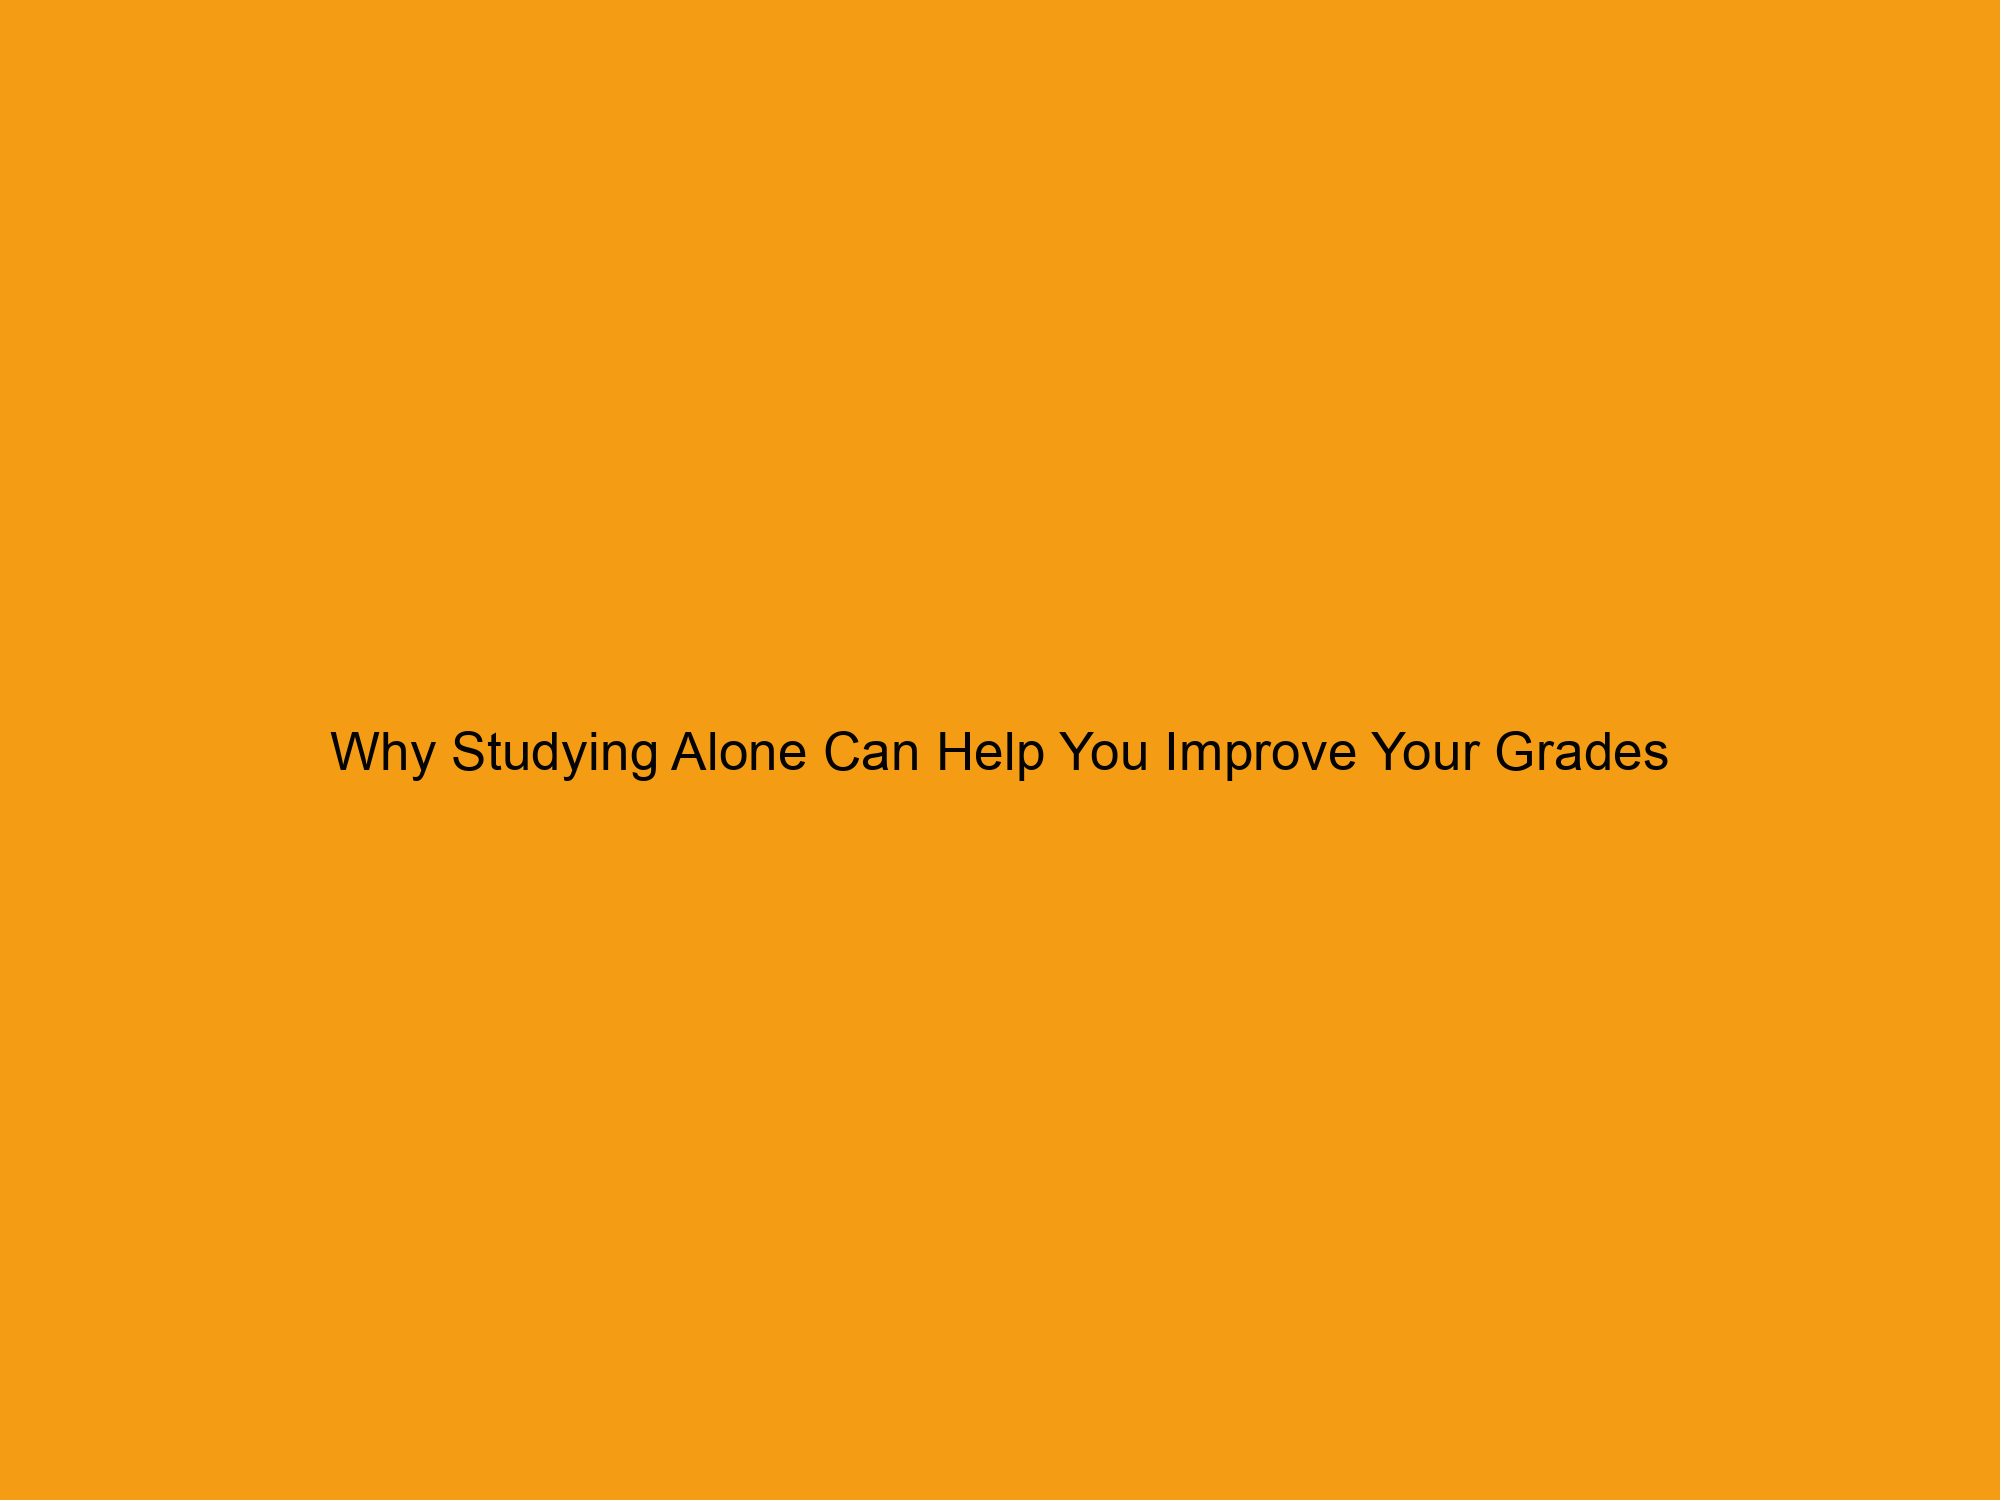 Why Studying Alone Can Help You Improve Your Grades